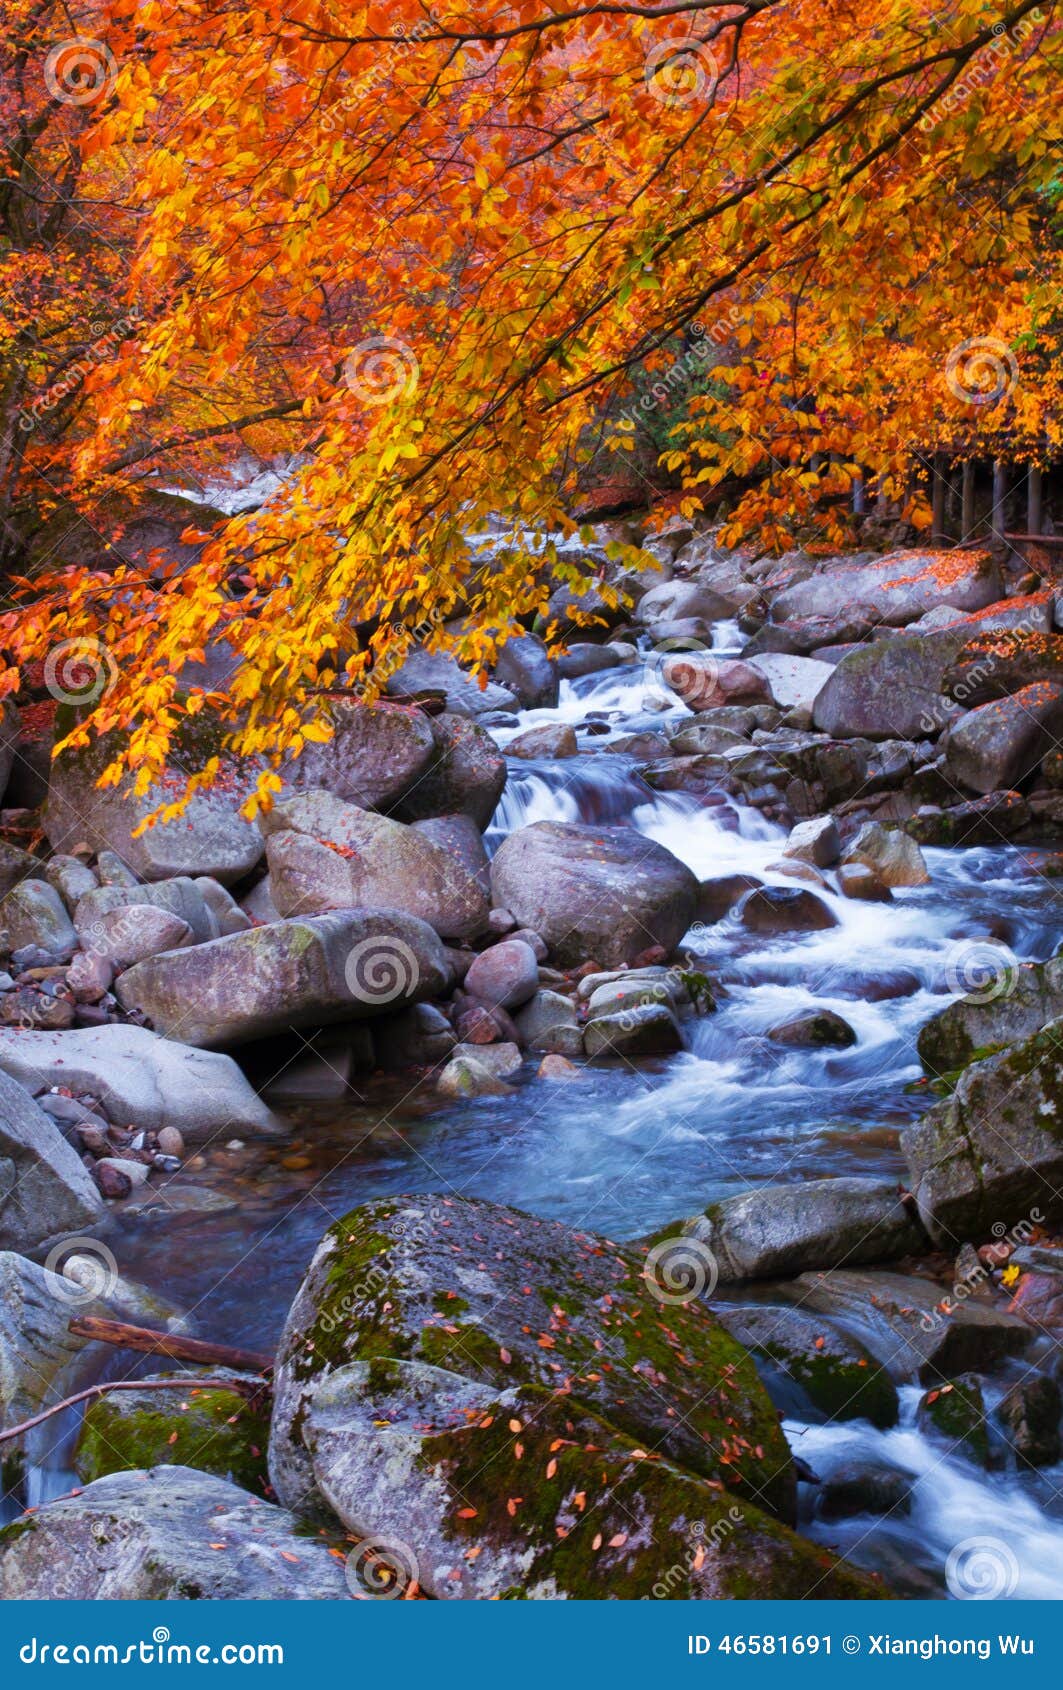 stream acrossing golden fall forest